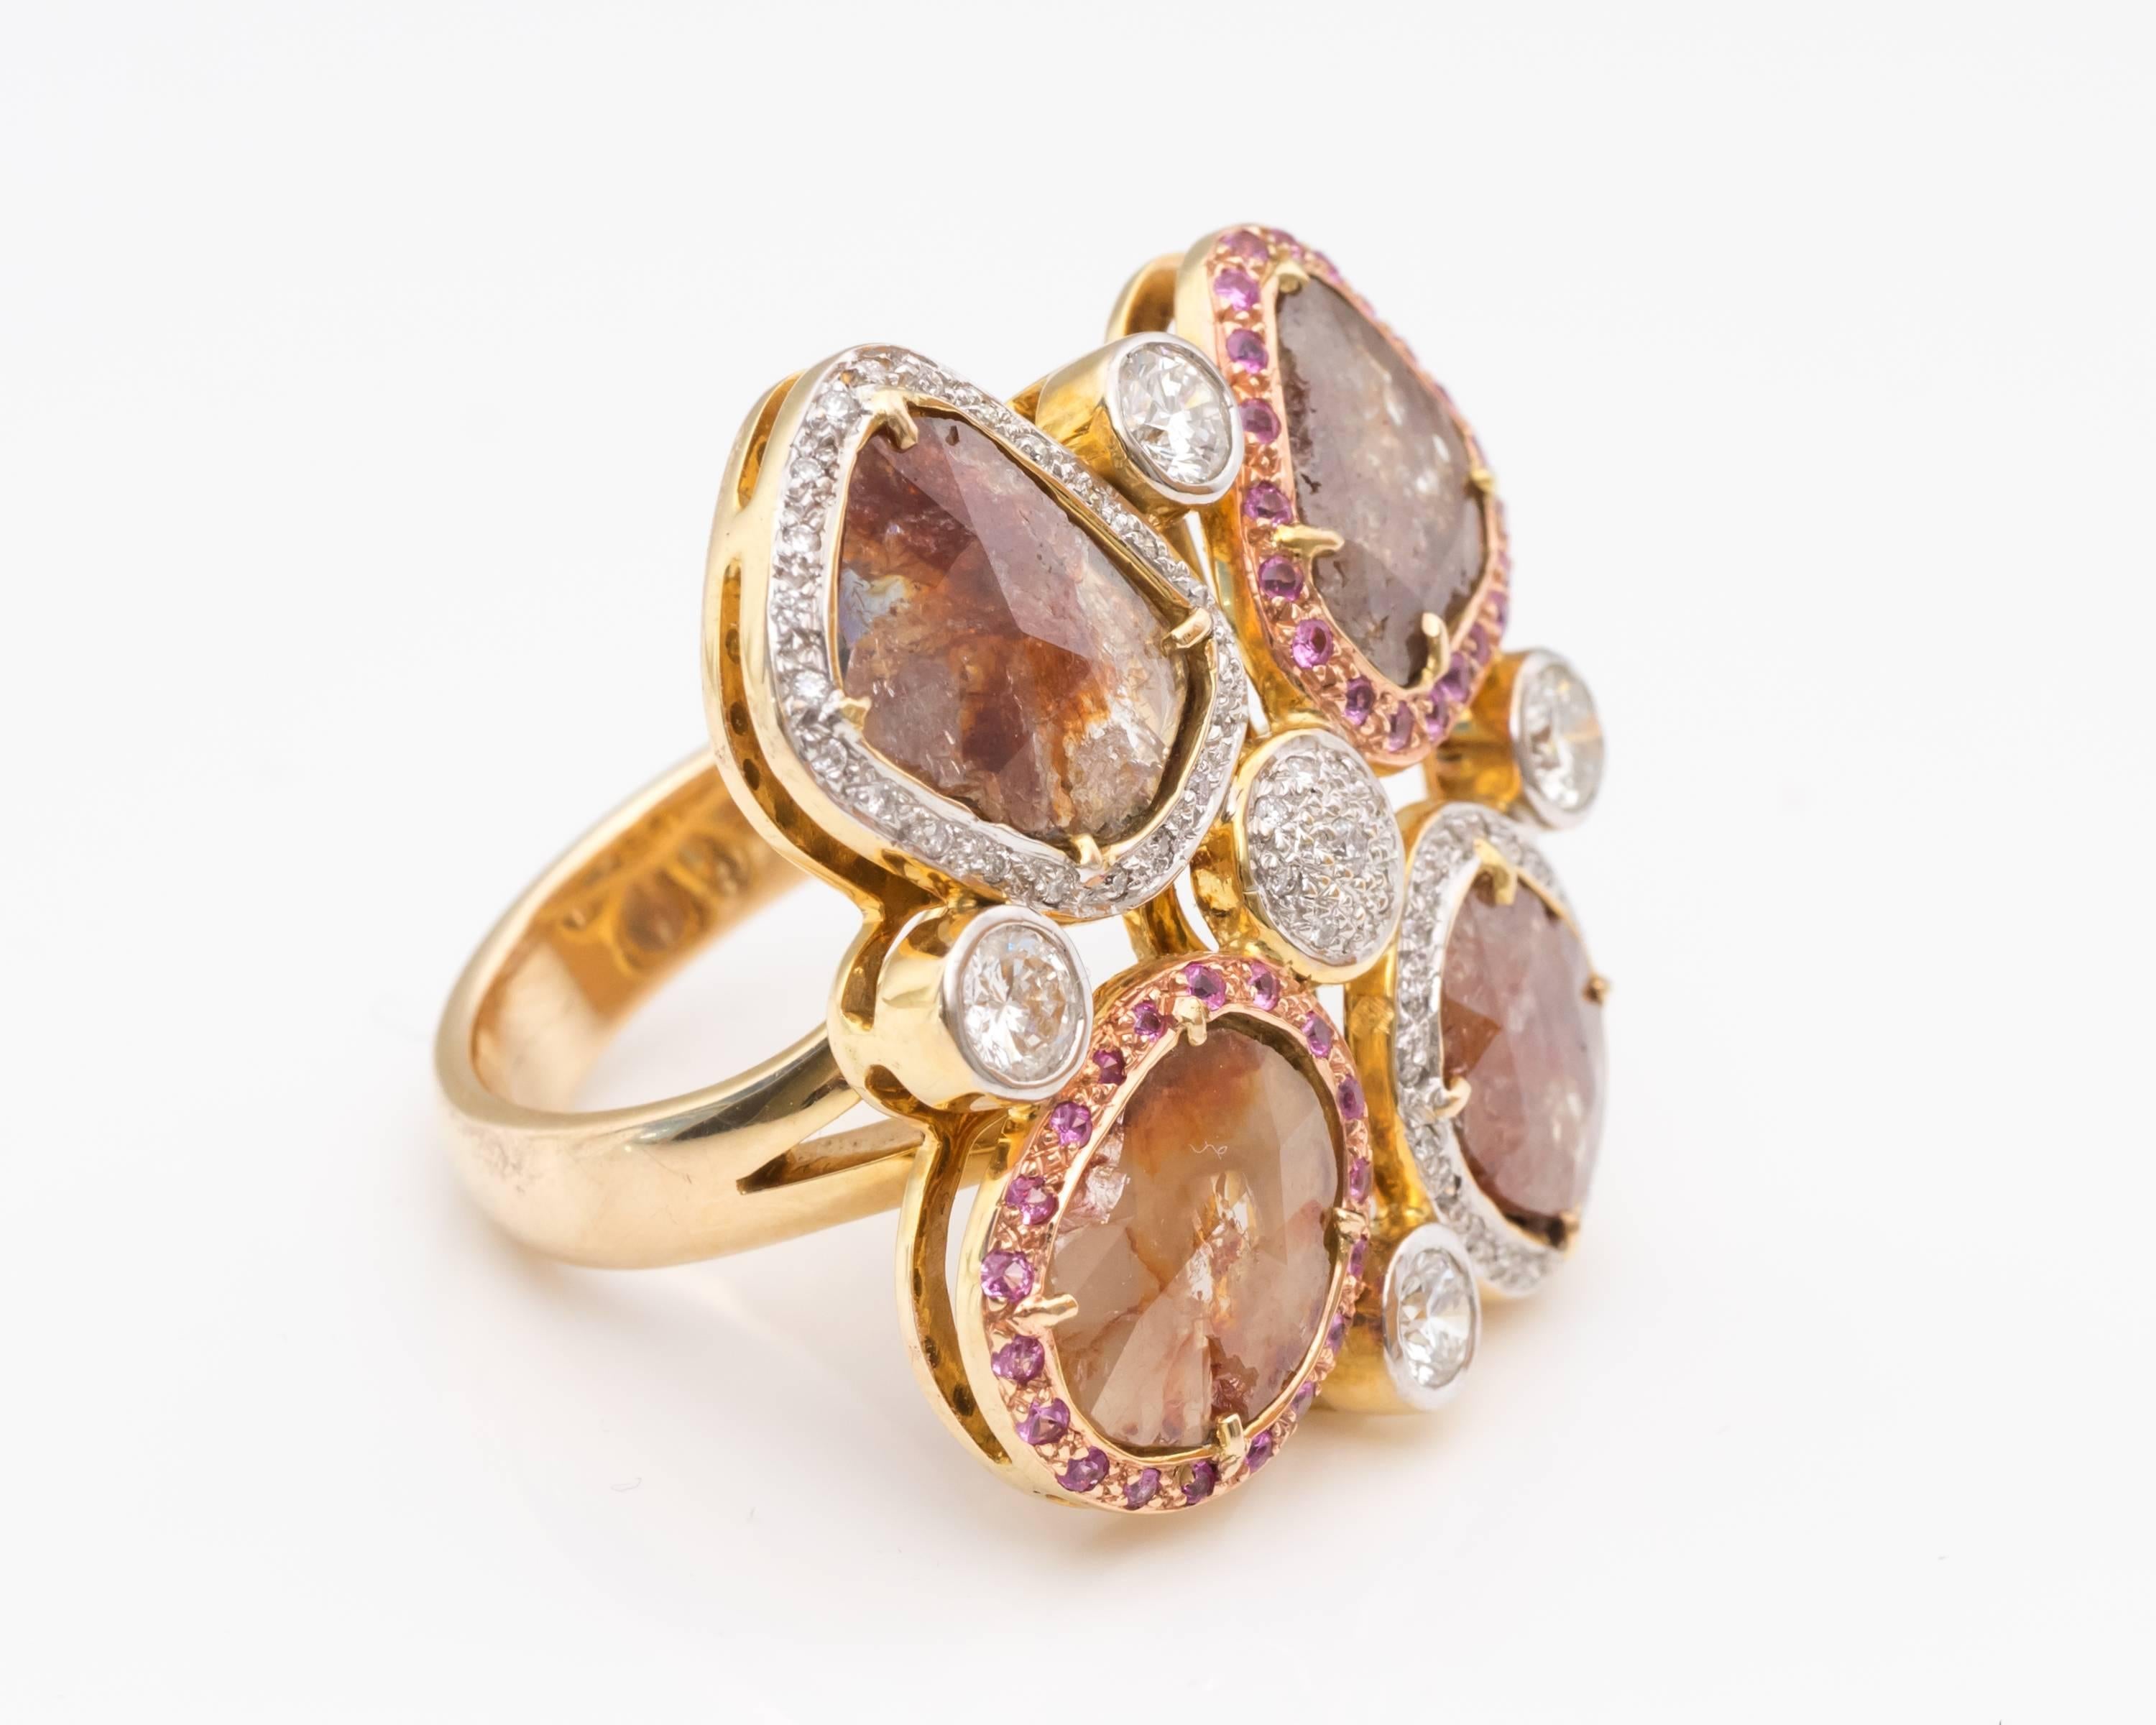 Butterfly Design Pattern Appearance
Beautiful Detailing on the Ring with Subtle Hues of Pinks, Rose Gold, Yellow Gold and Sparkling Diamonds
4 Carats of Diamond Slices
Included with Different Natural Minerals 
Accent Diamonds surrounding the diamond